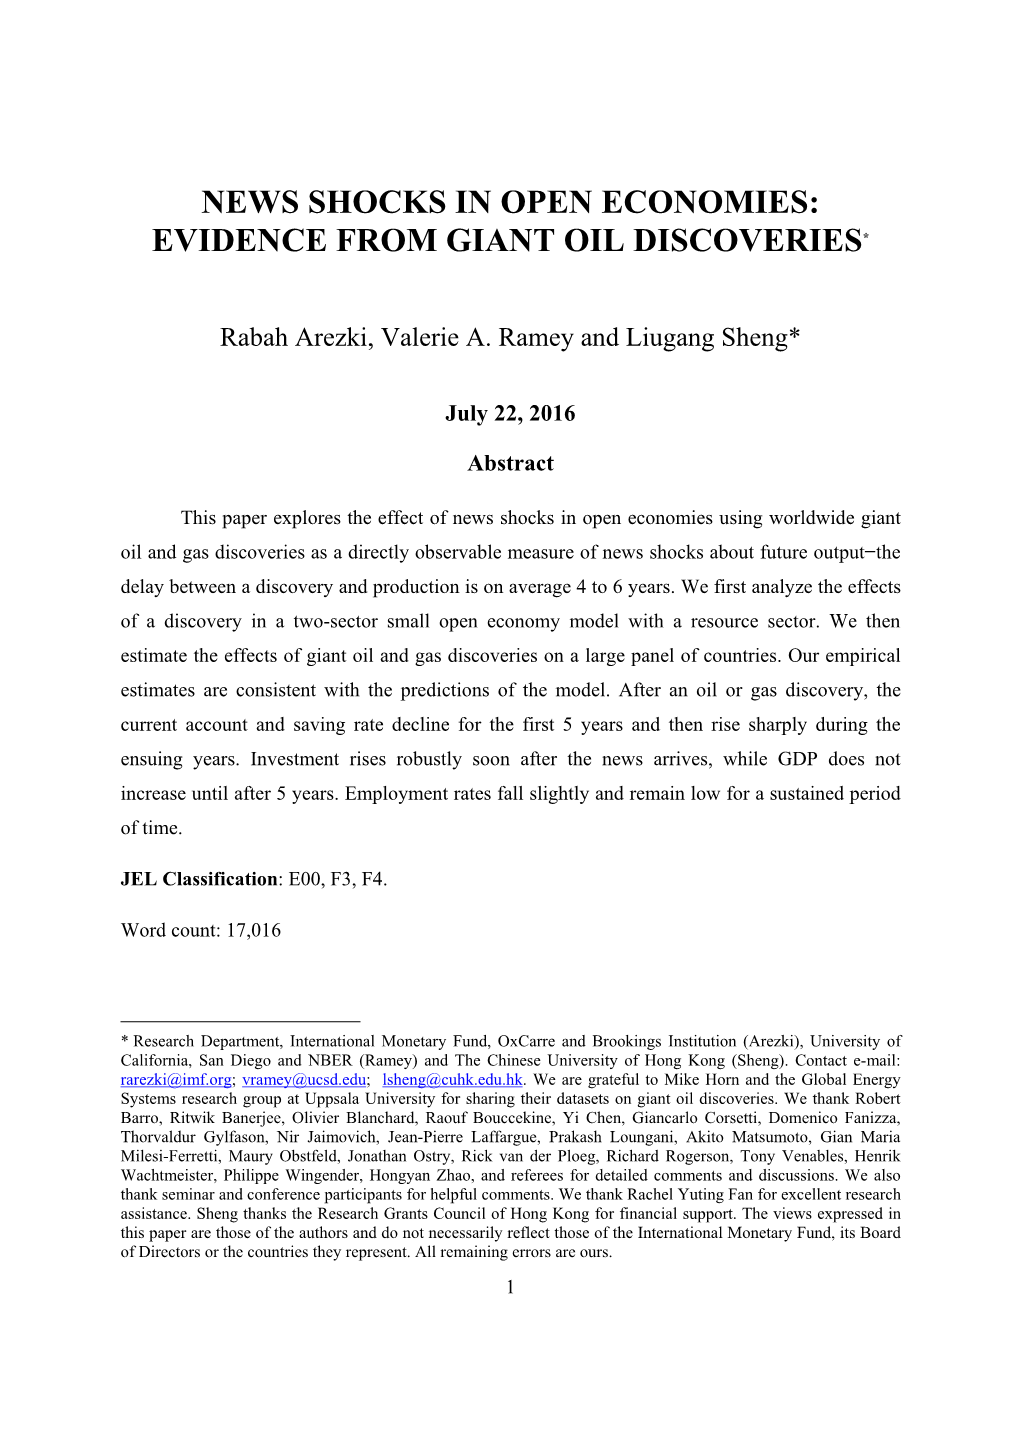 News Shocks in Open Economies: Evidence from Giant Oil Discoveries*